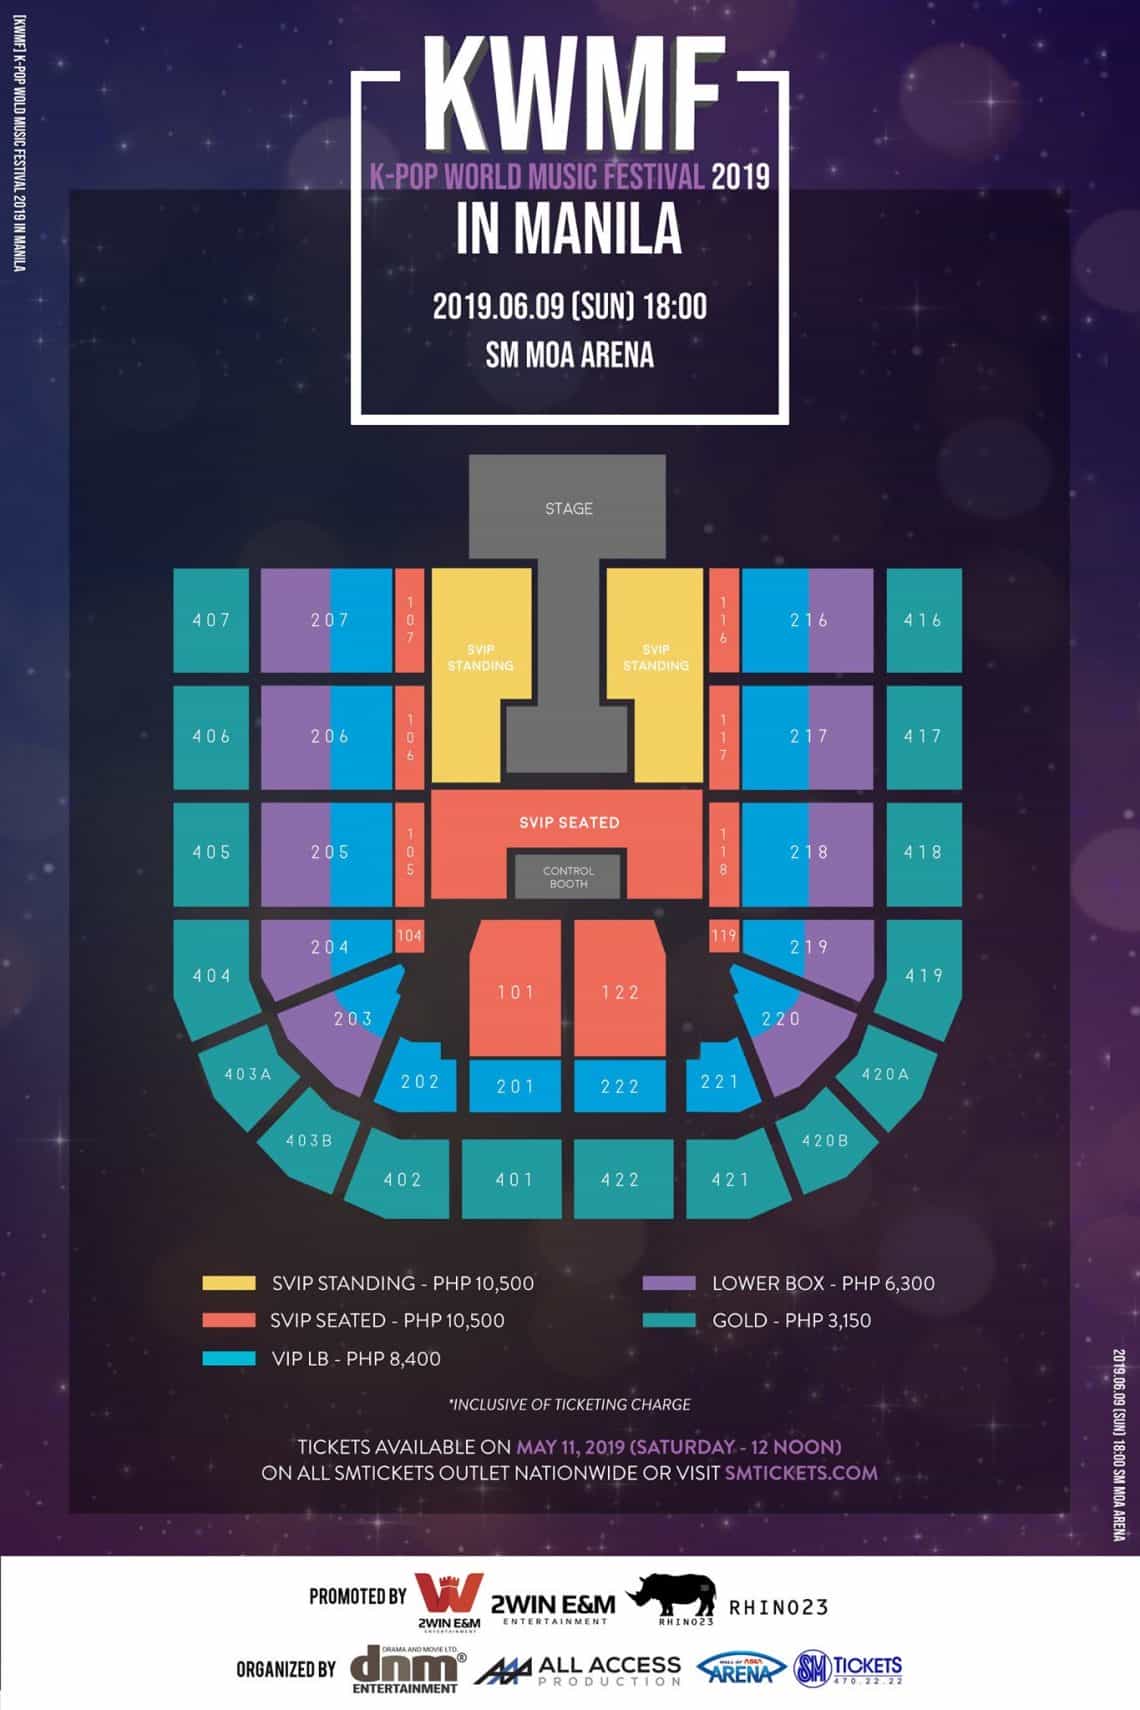 Ticket prices and seat layout information for 2019 KPOP WORLD MUSIC